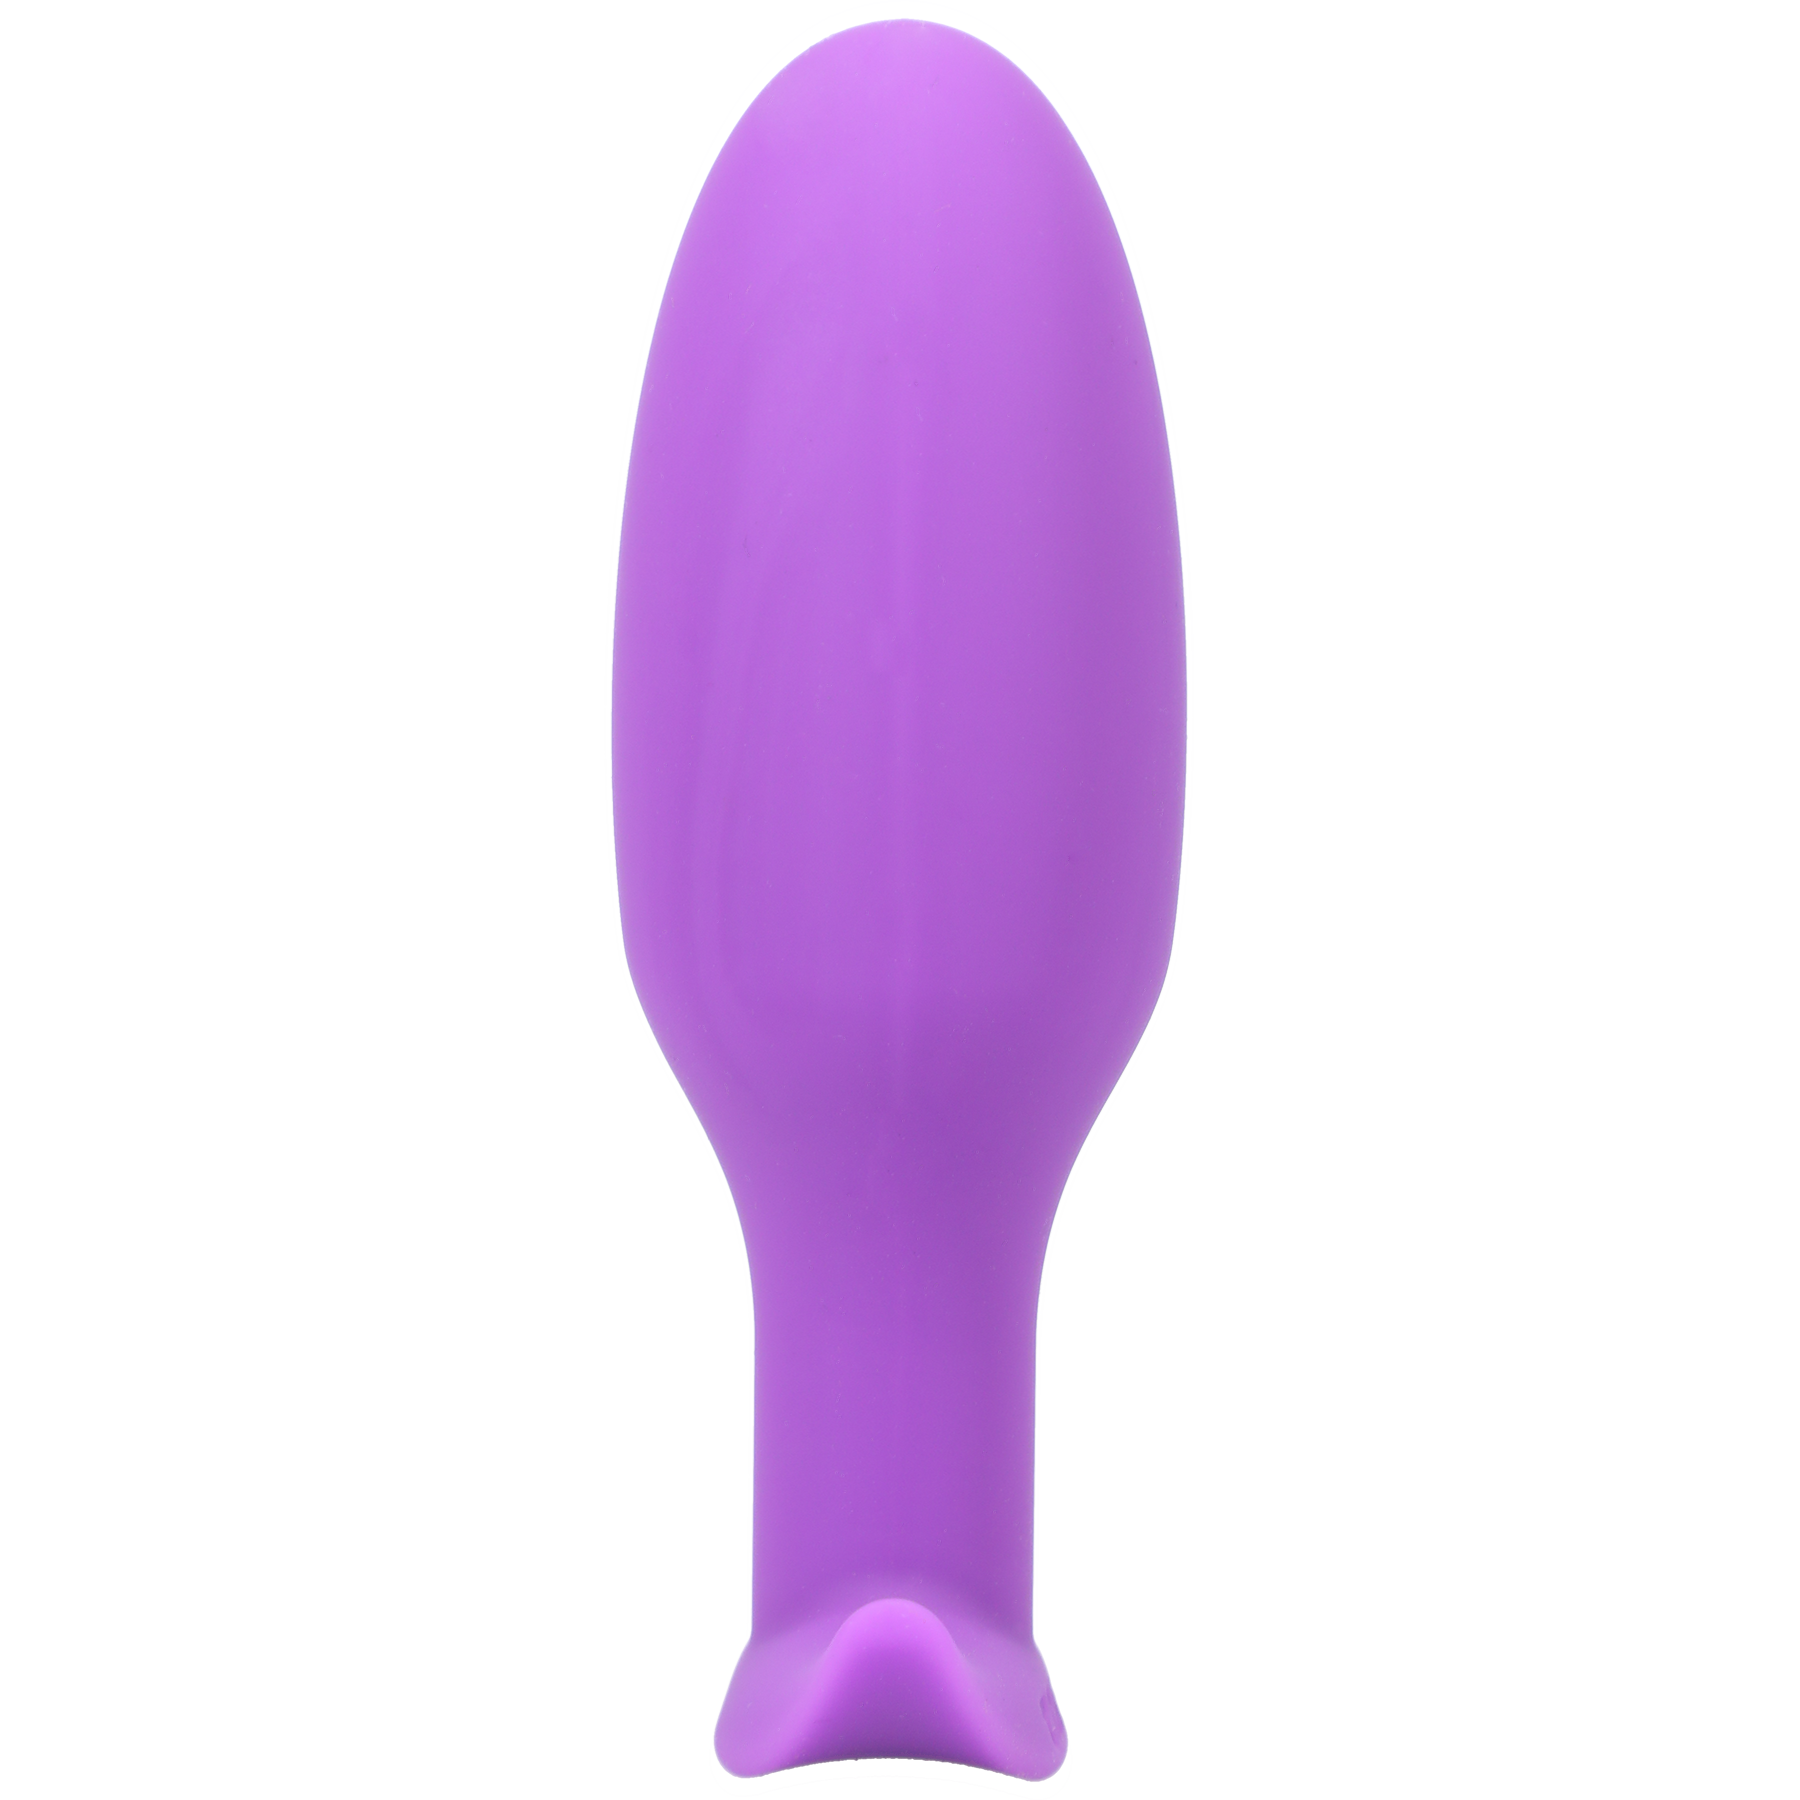 Silicone Ryder Butt Plug - Lilac Color by Tantus